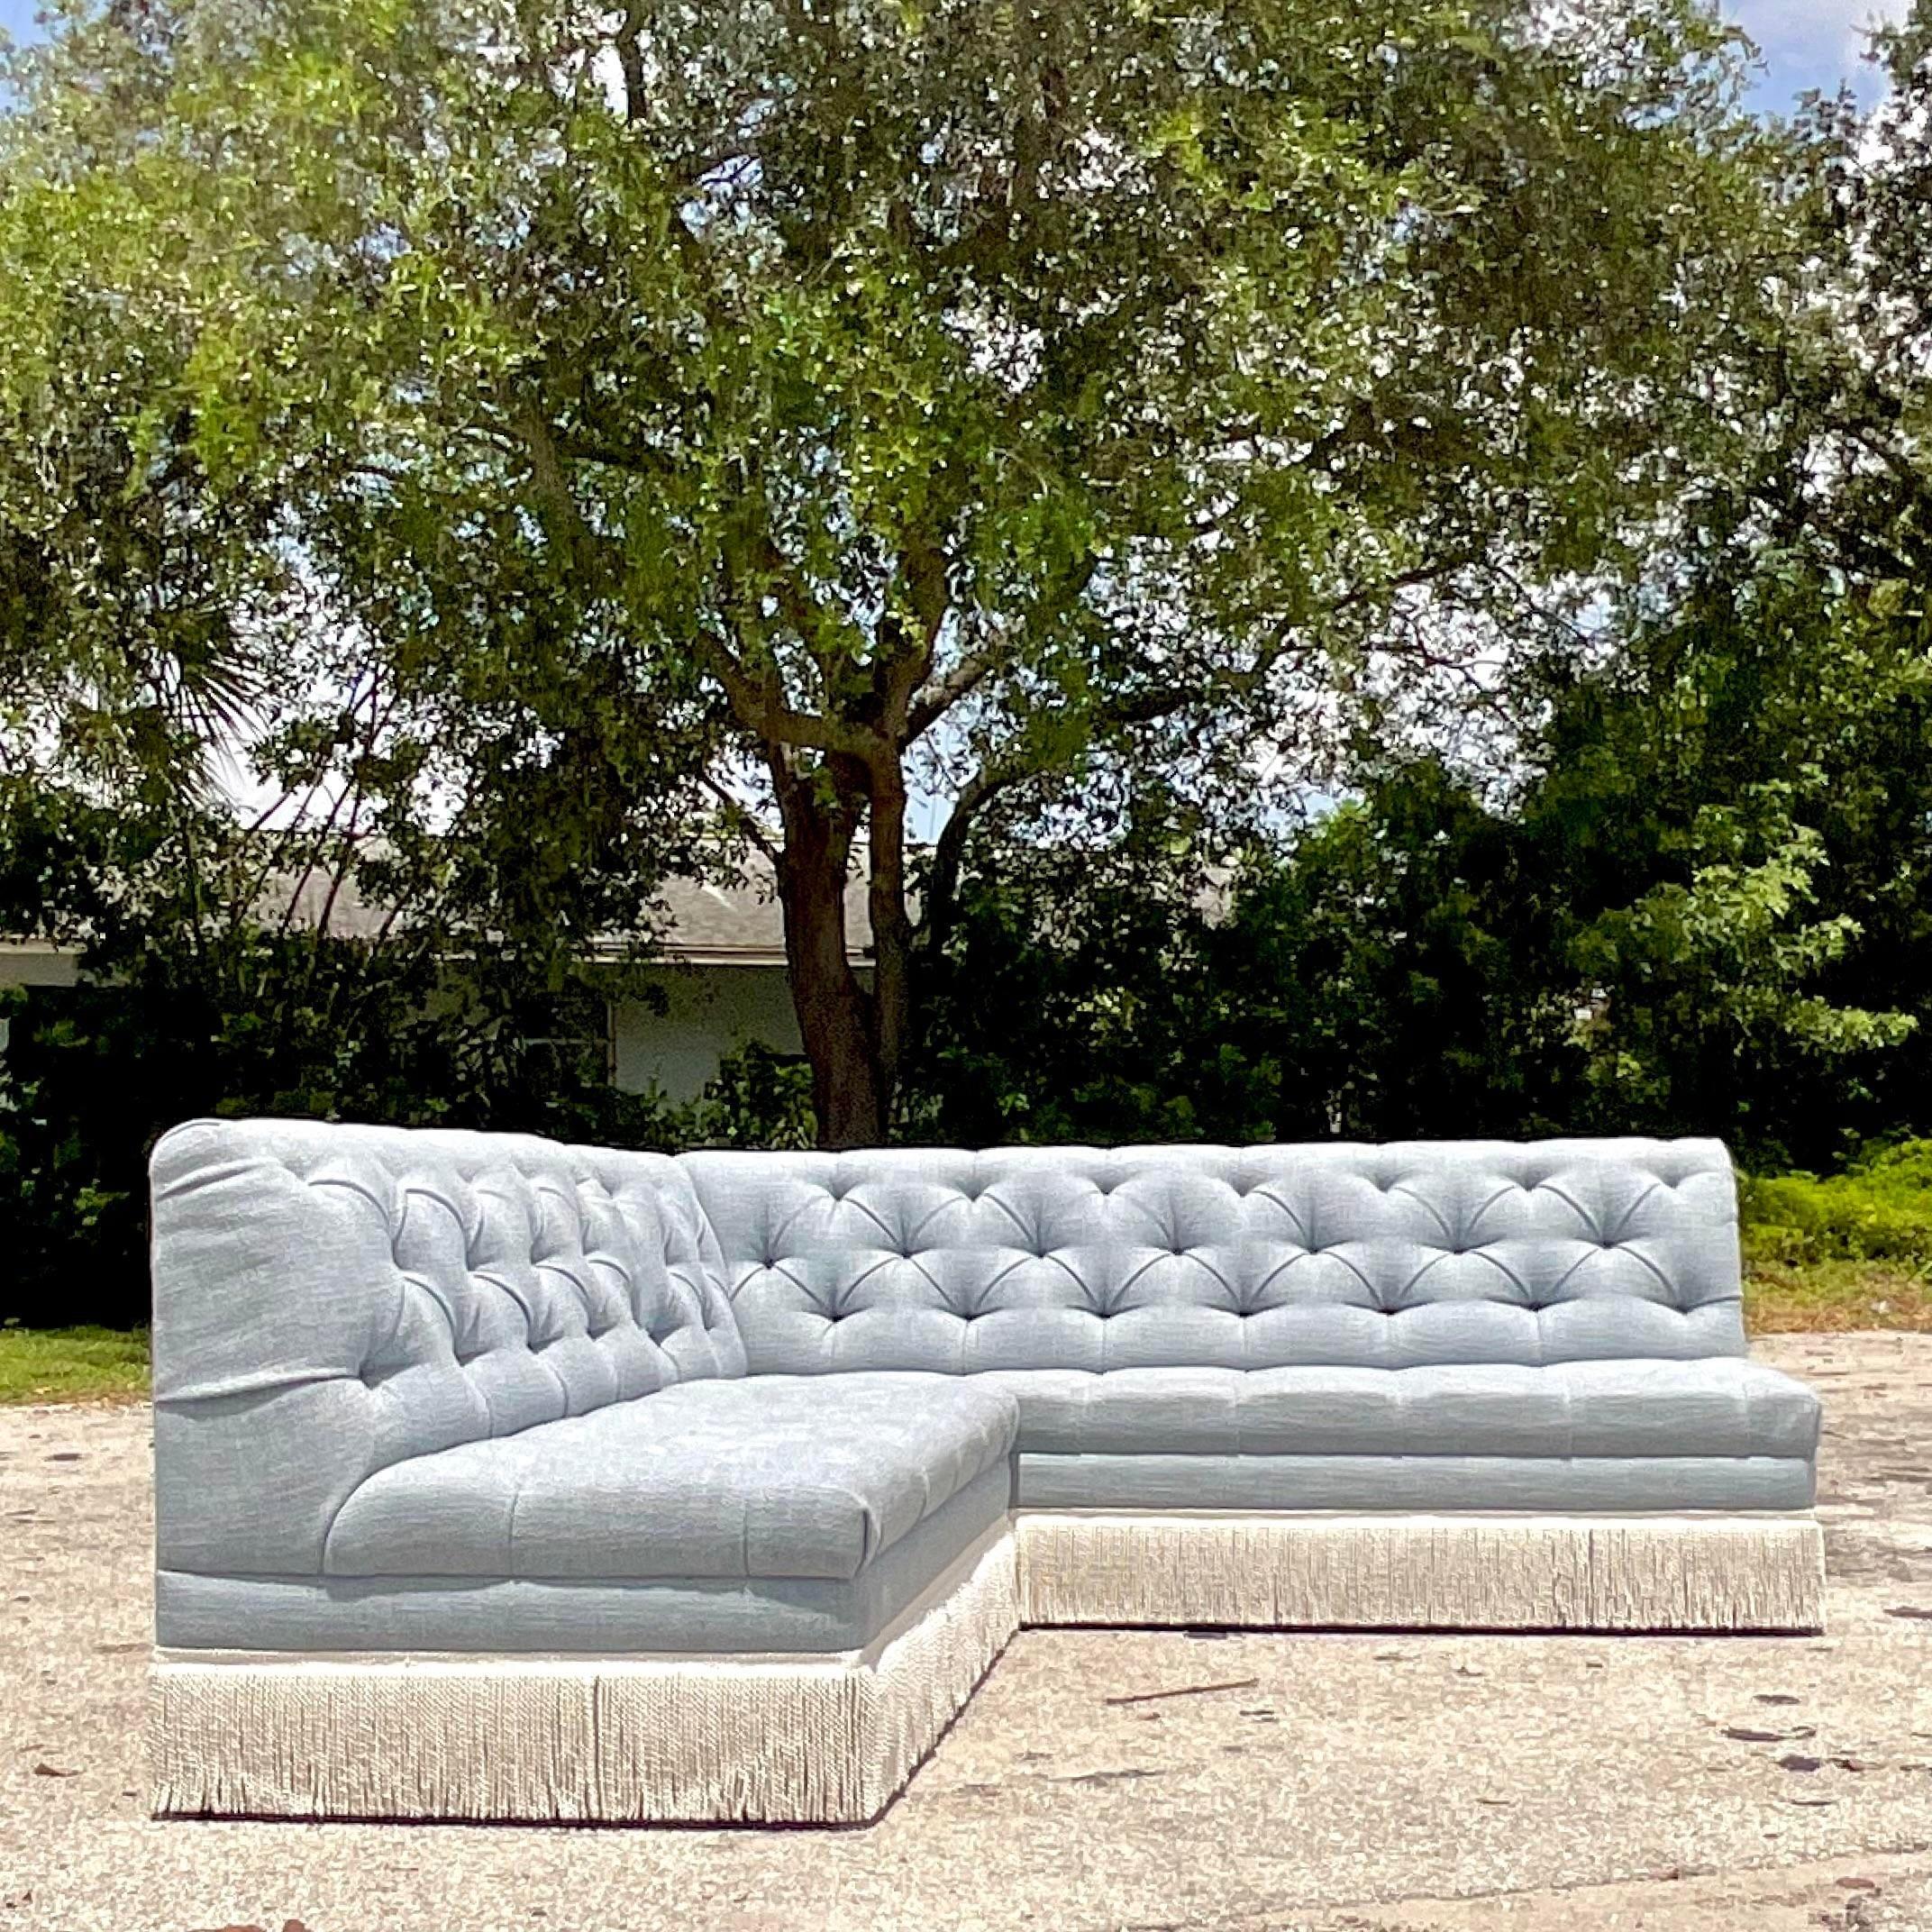 Fabric Vintage Custom Boho O'Henry Tufted Banquette Sectional Sofa For Sale